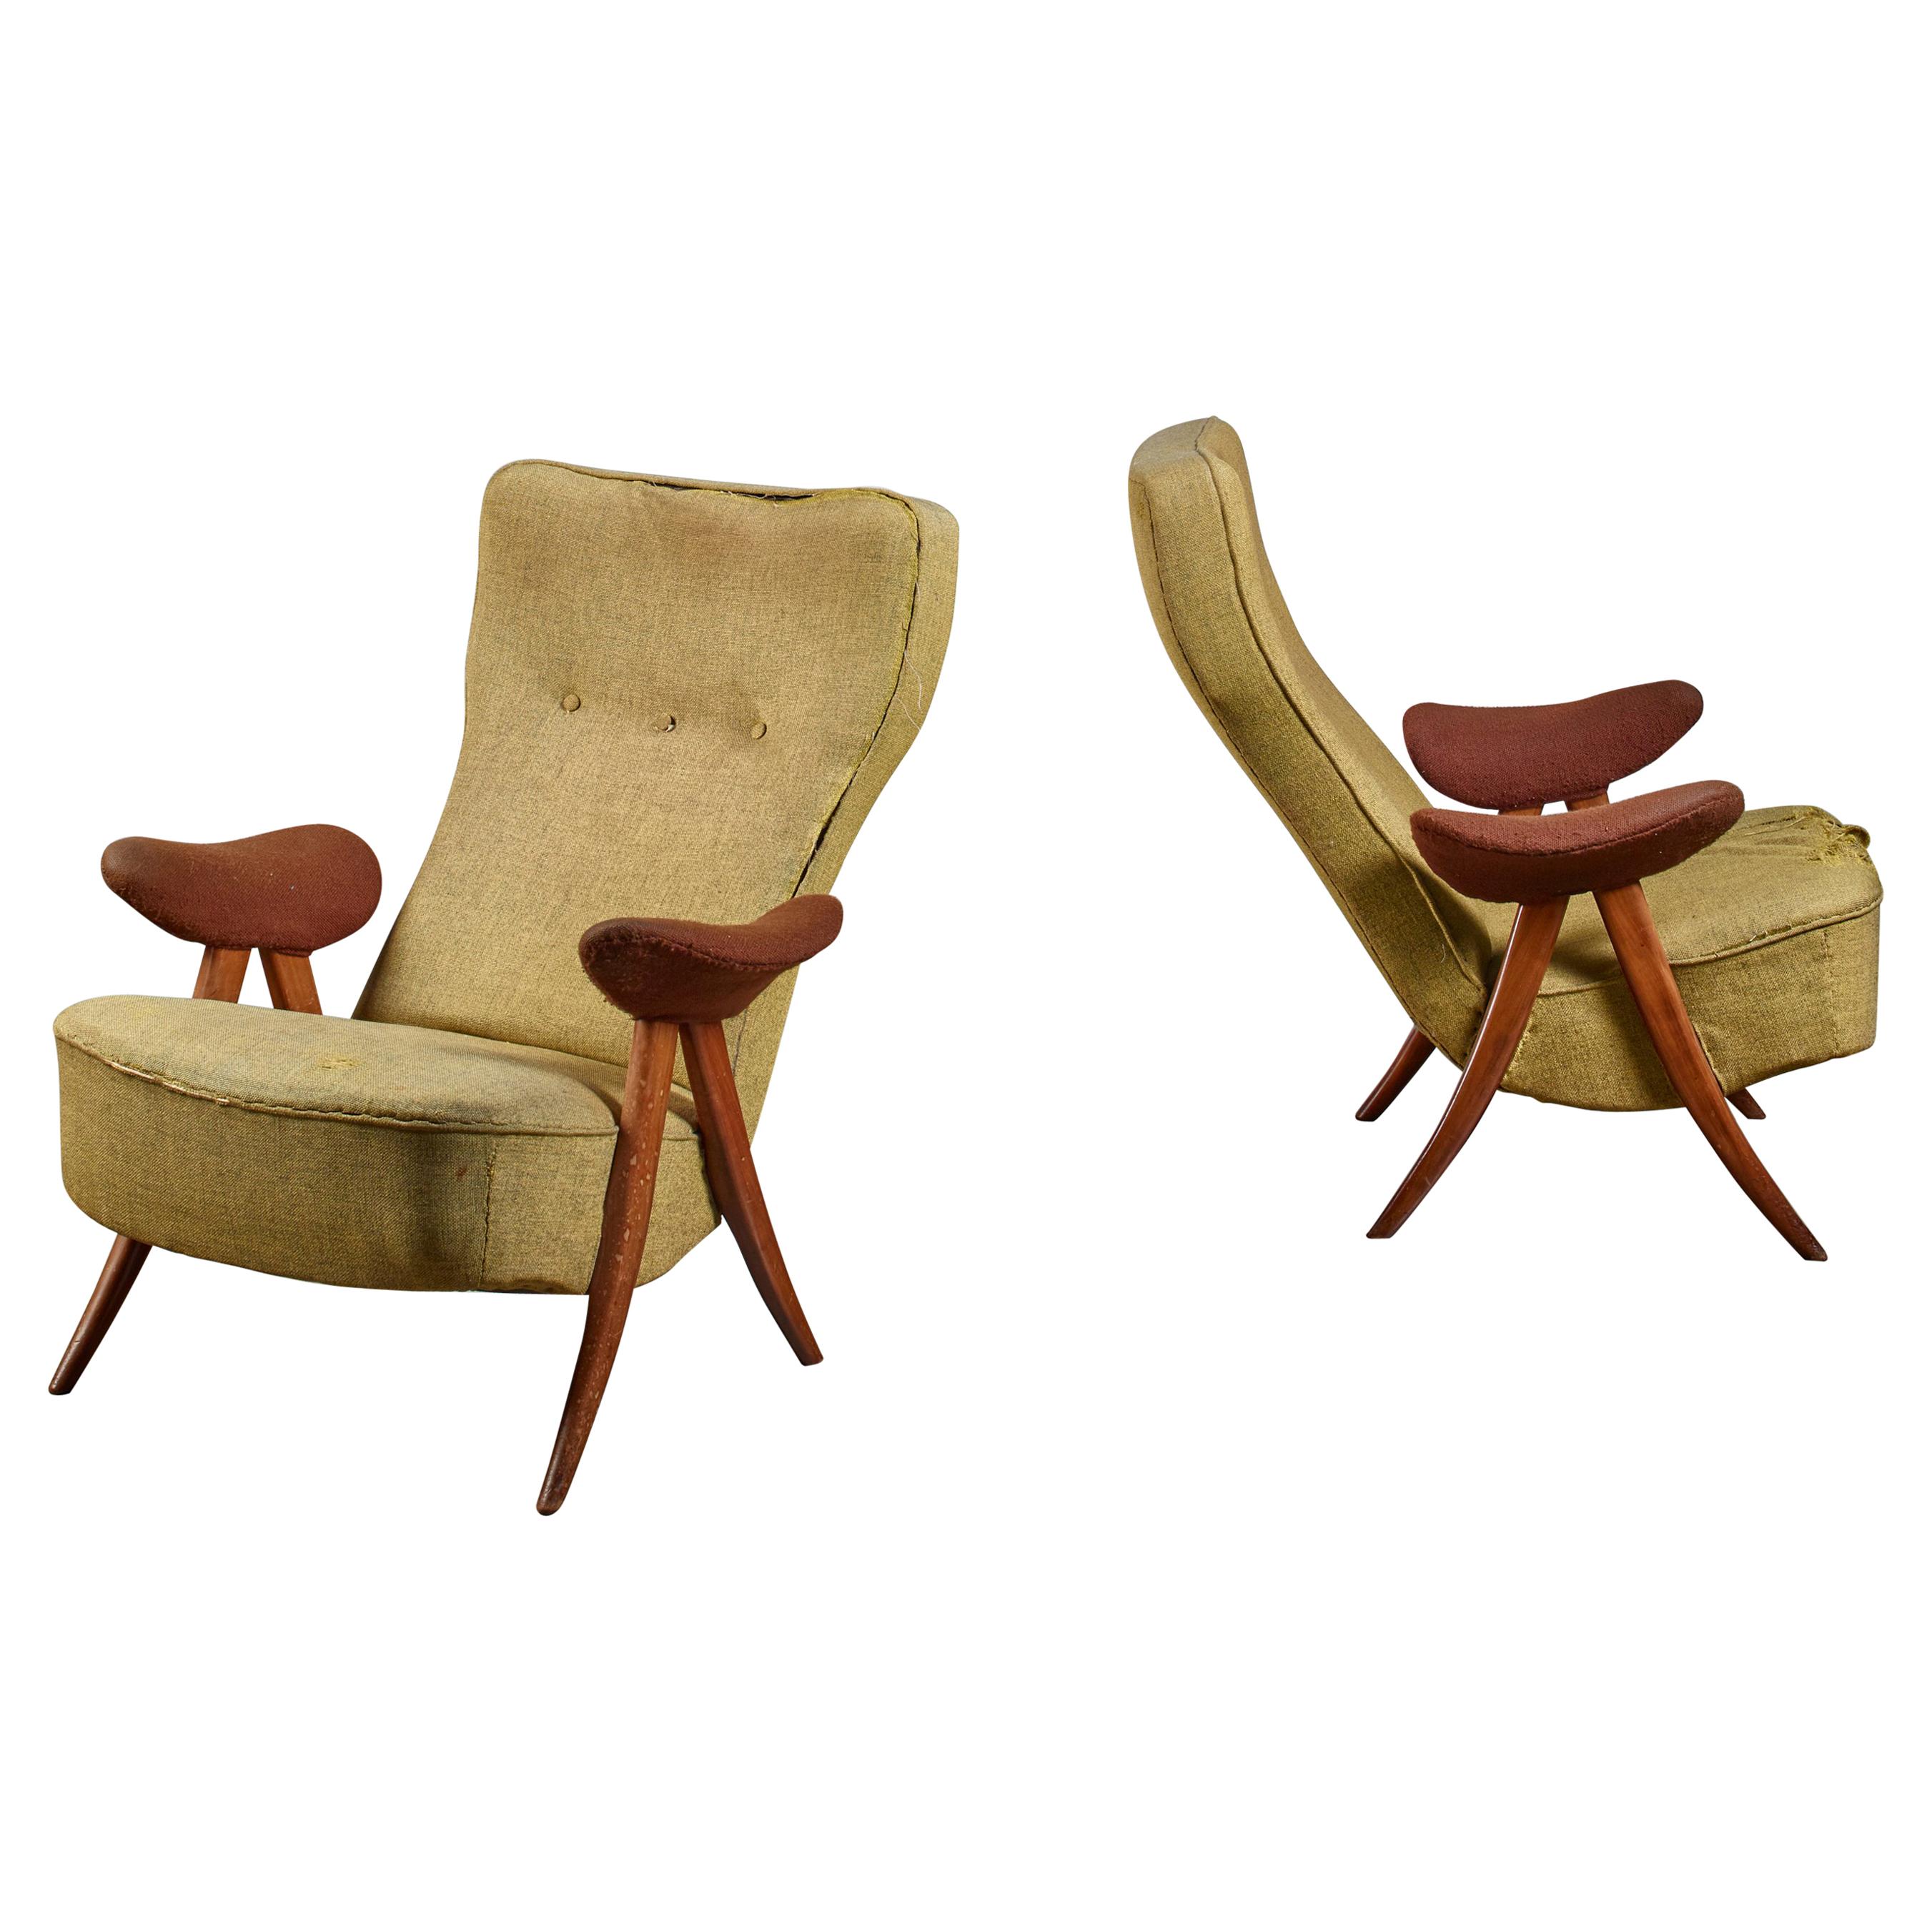 Pair of Theo Ruth Model 105 Chairs, the Netherlands, 1950s